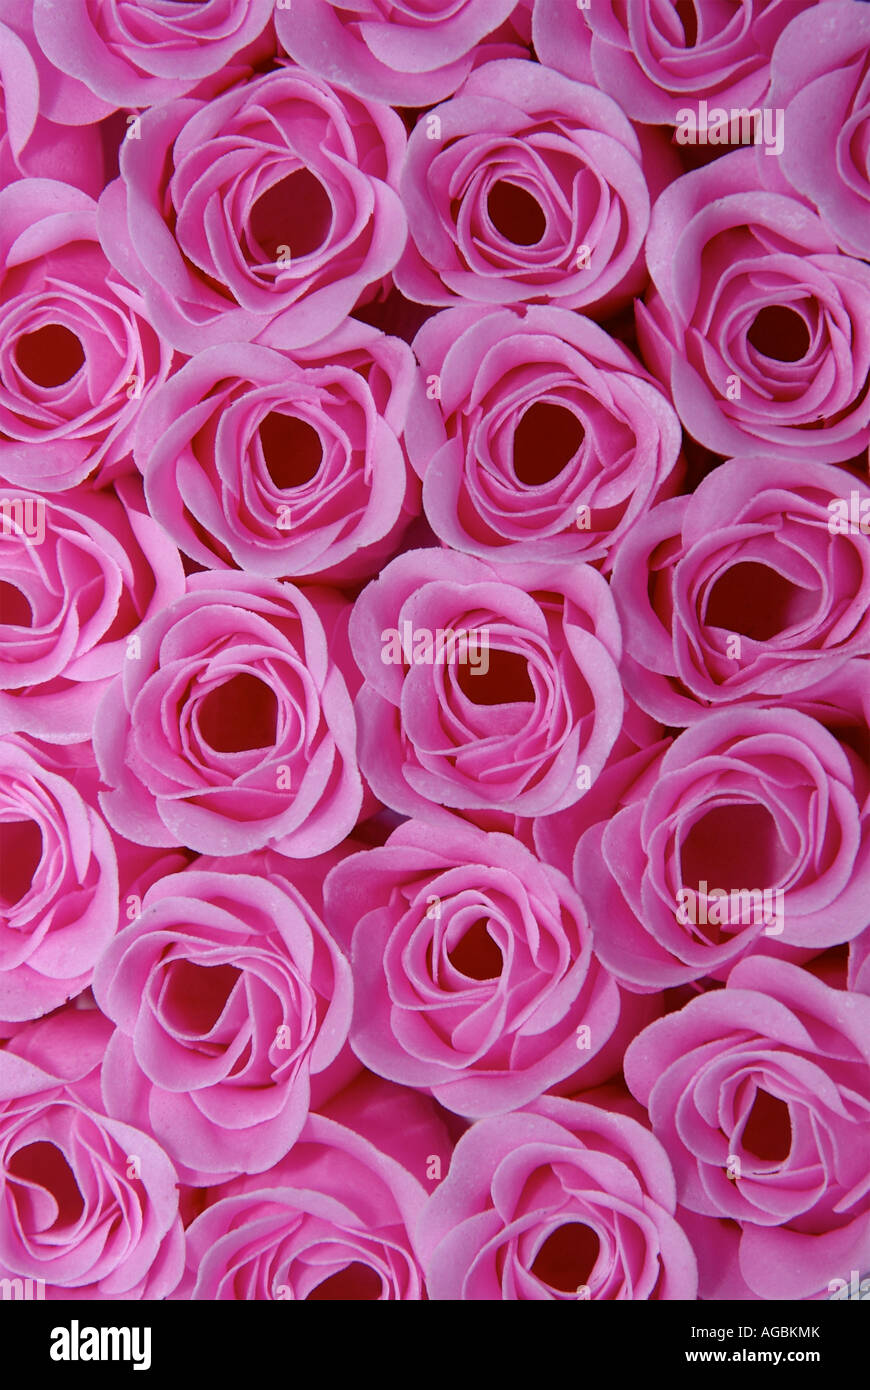 Artificial pink roses. Stock Photo